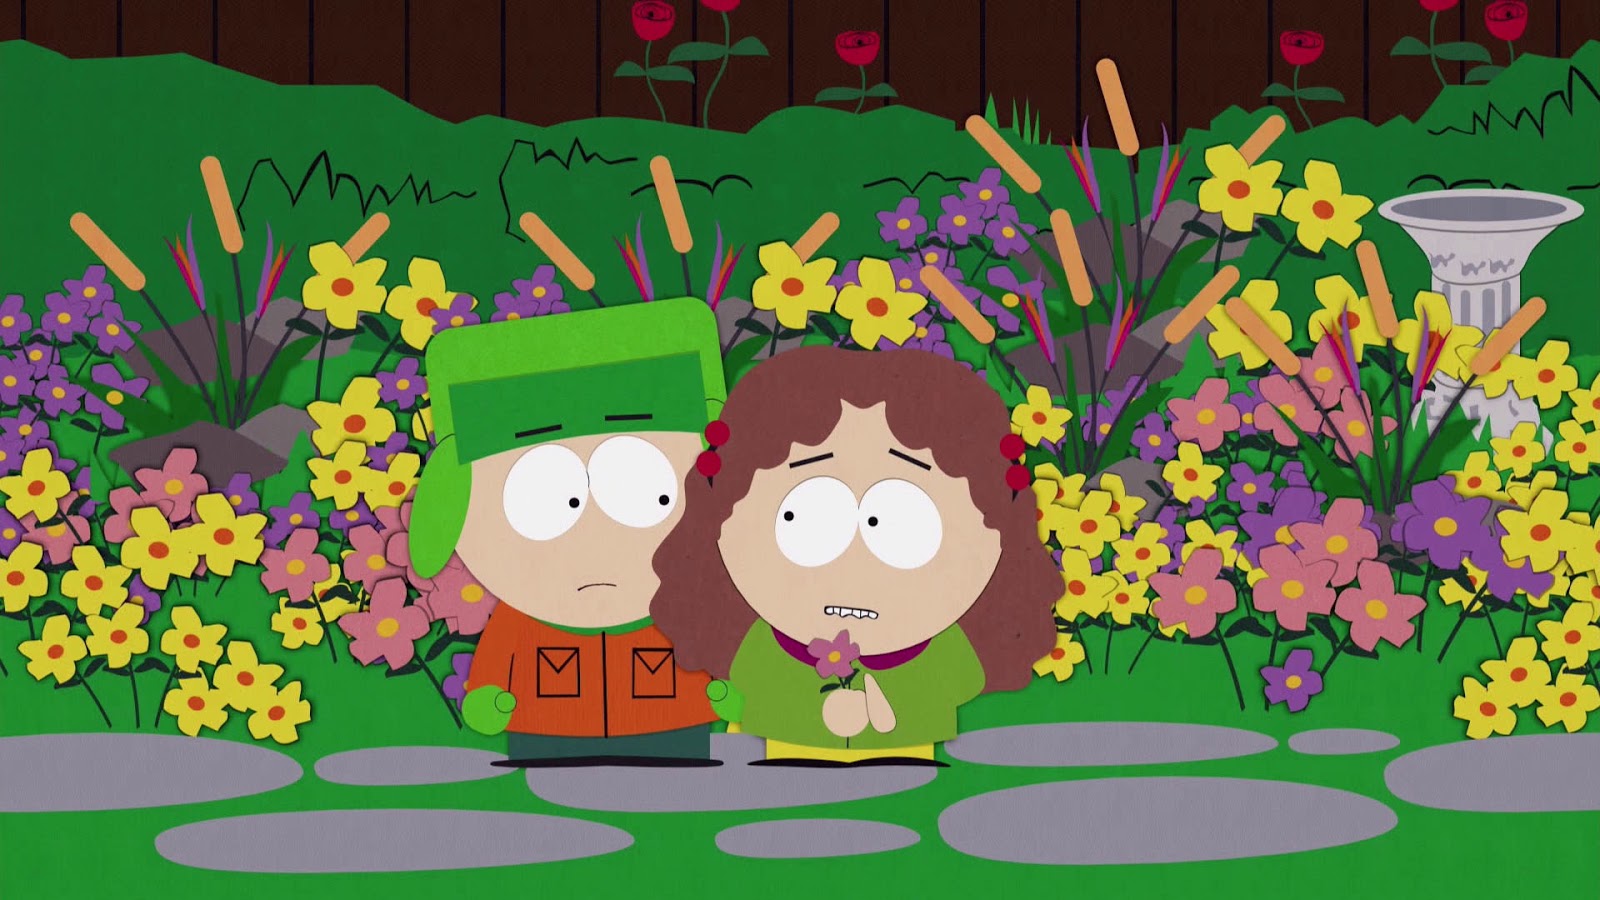 South Park - "Hooked on Monkey Fonics" HD Screen Captures.